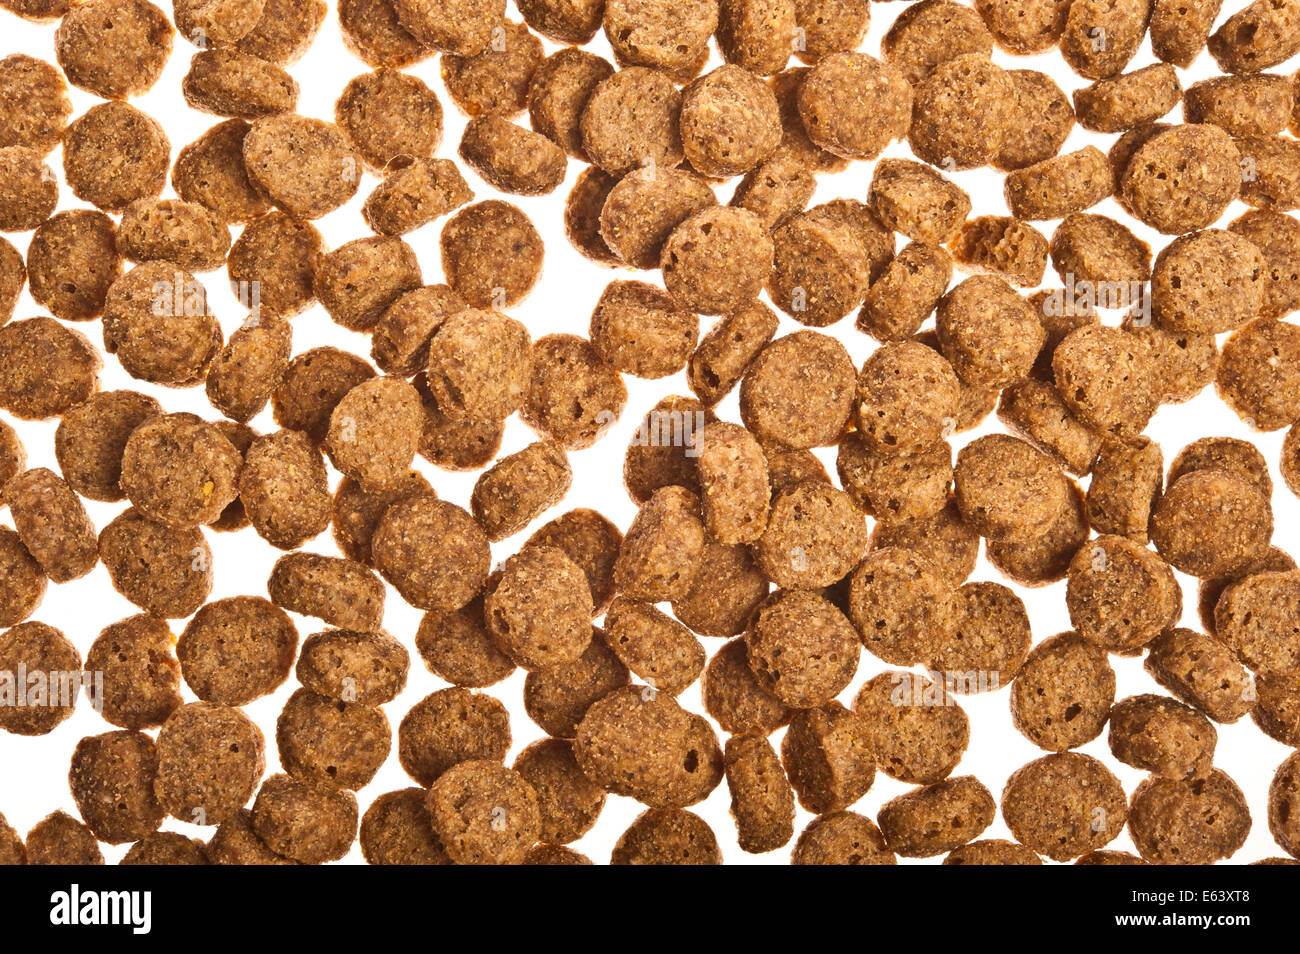 dry food for dog Stock Photo